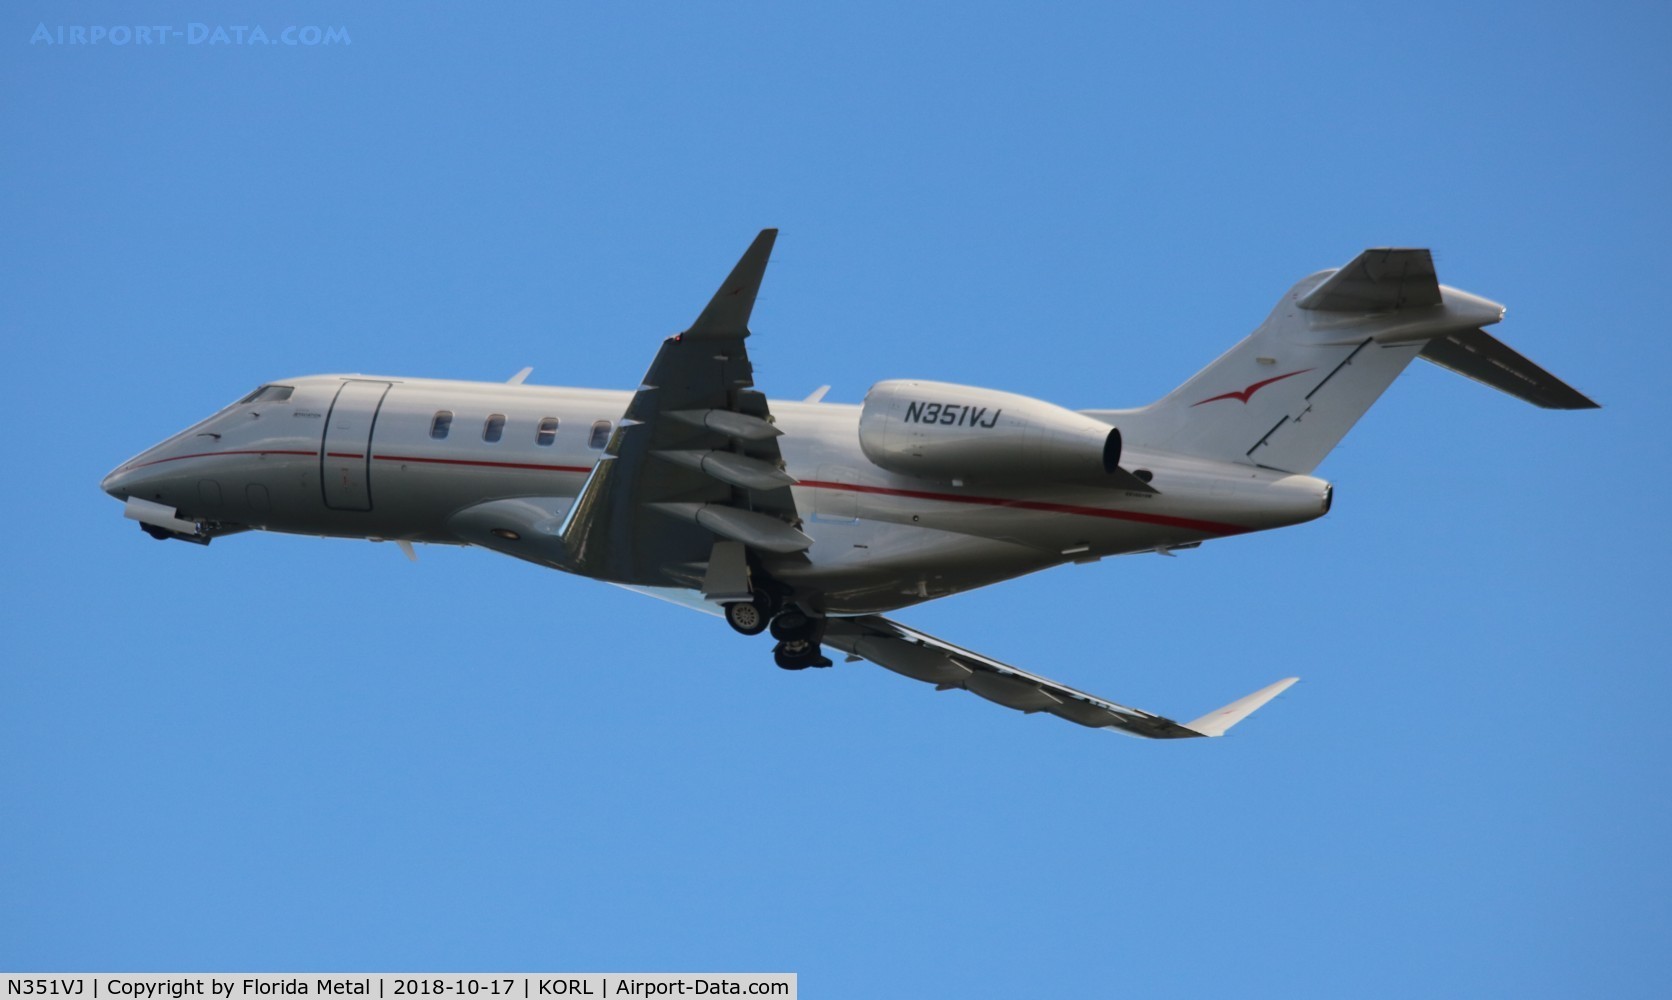 N351VJ, 2015 Bombardier Challenger 350 (BD-100-1A10) C/N 20573, Challenger 350 zx